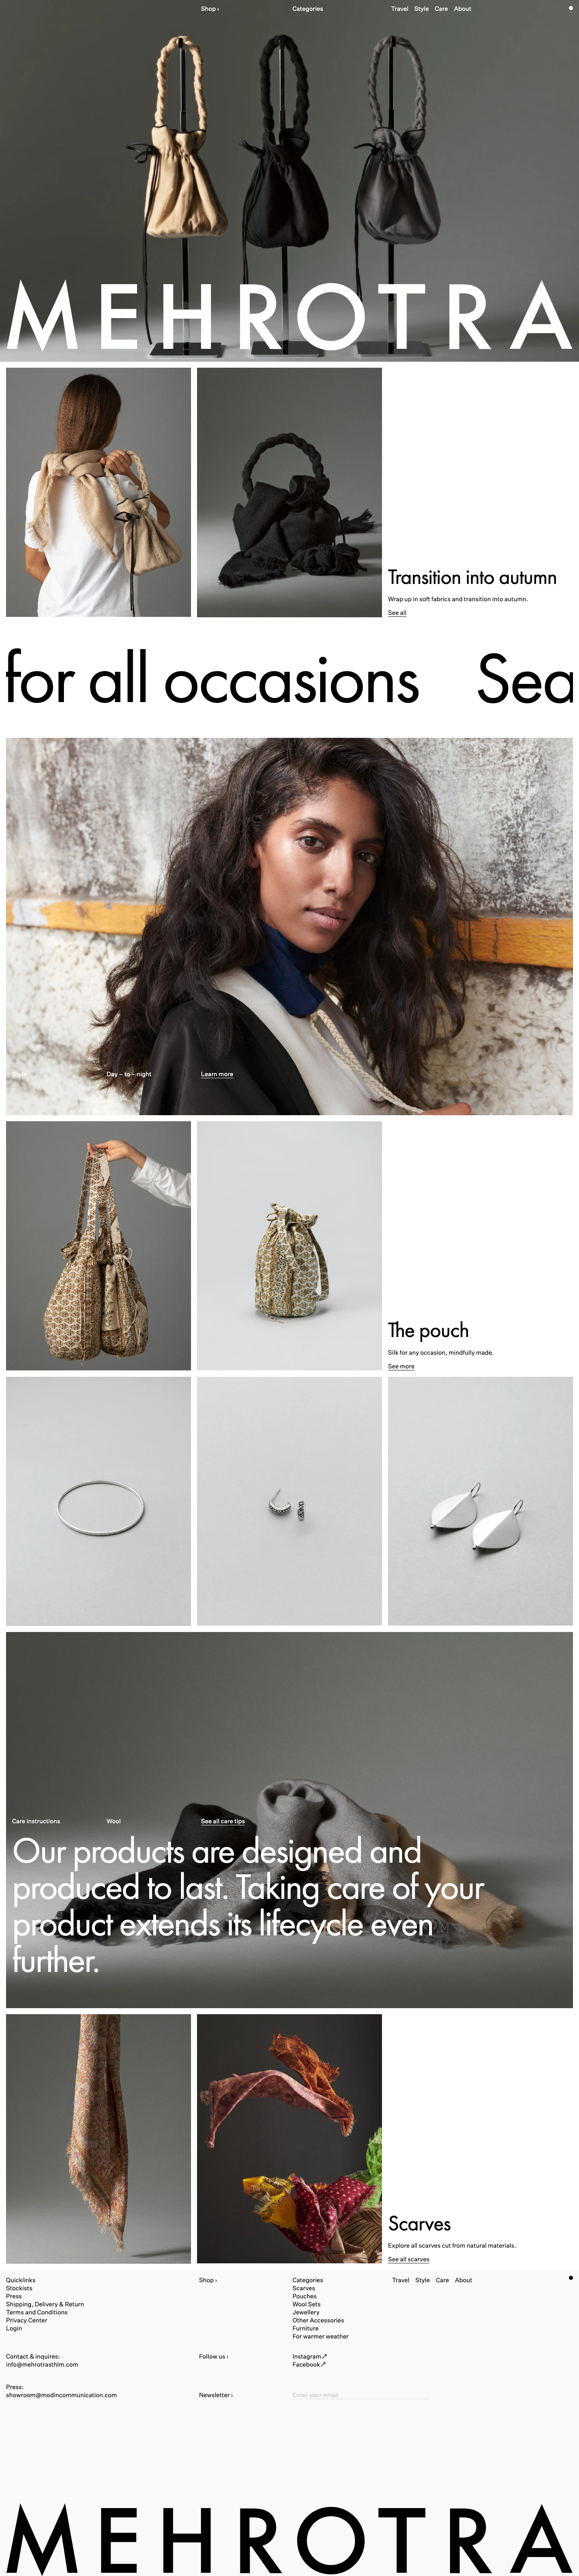 Mehrotra Landing Page Example: Mehrotra is a Stockholm based design line combining Swedish minimalism and Indian warmth with the vision to create long lasting everyday pieces. Our products are designed and produced to last. Taking care of your product extends its lifecycle even further.